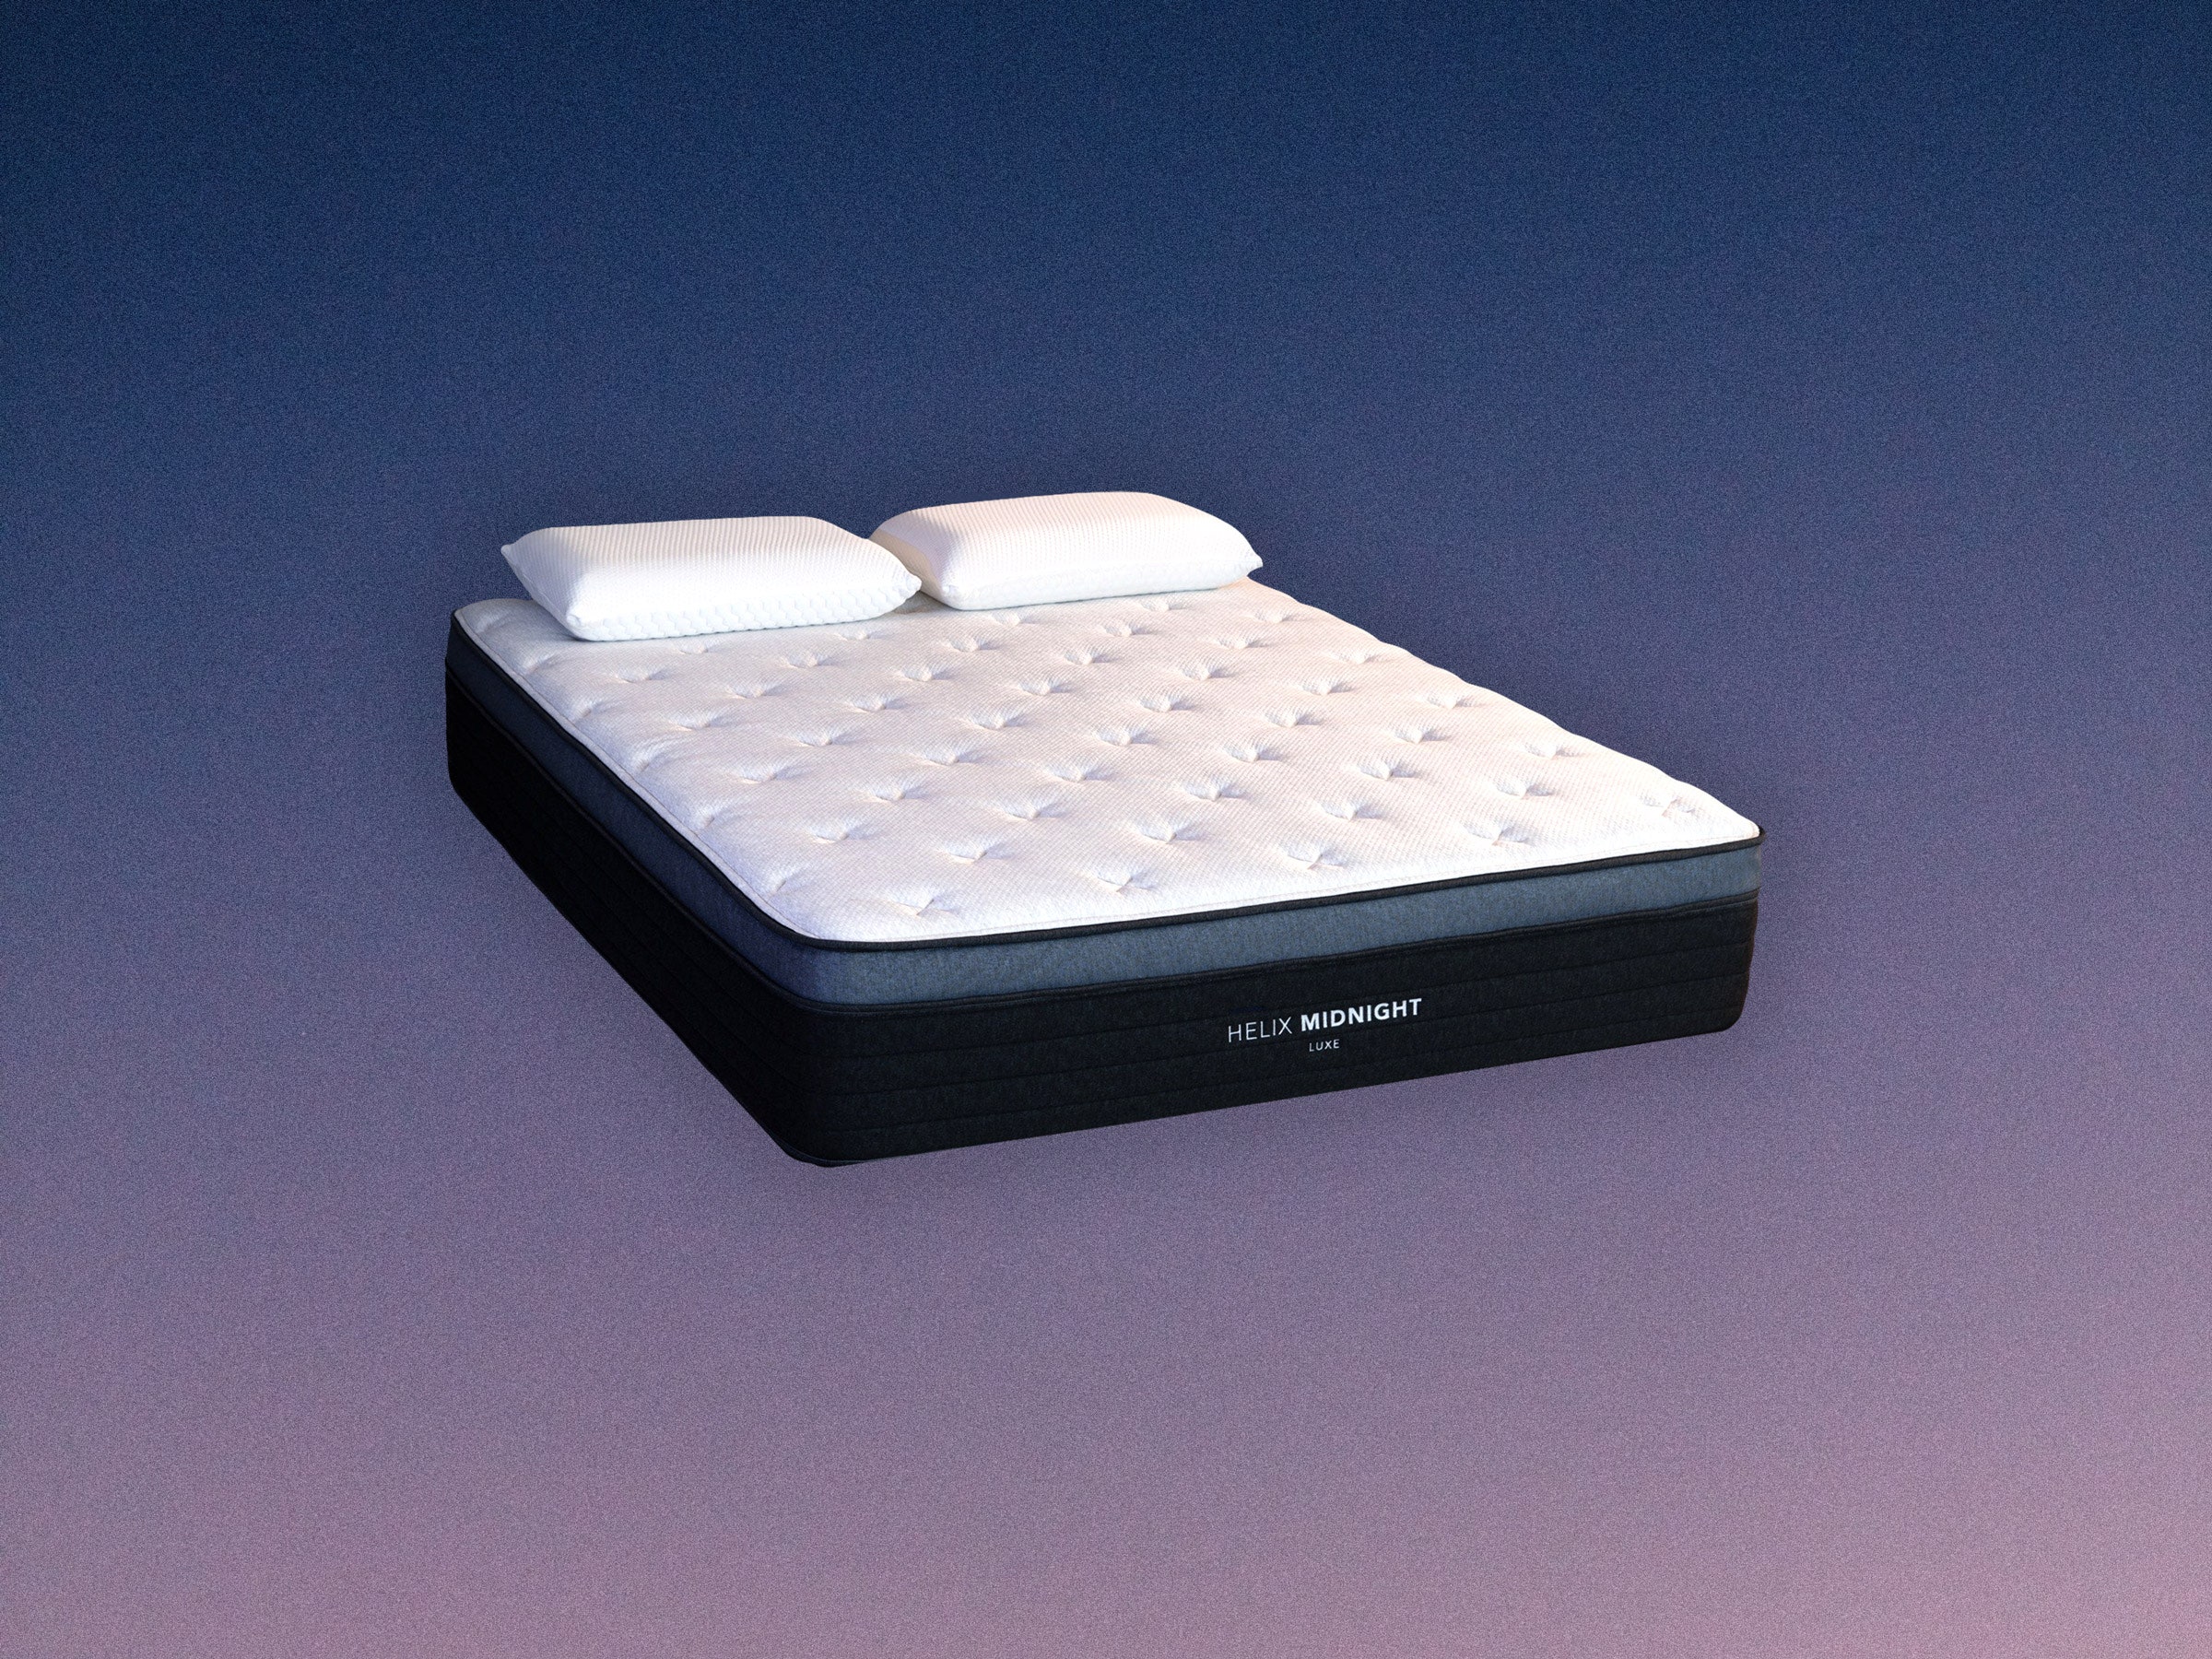 Presidents’ Day Mattress Deals: Buy Now Before They’re Gone!